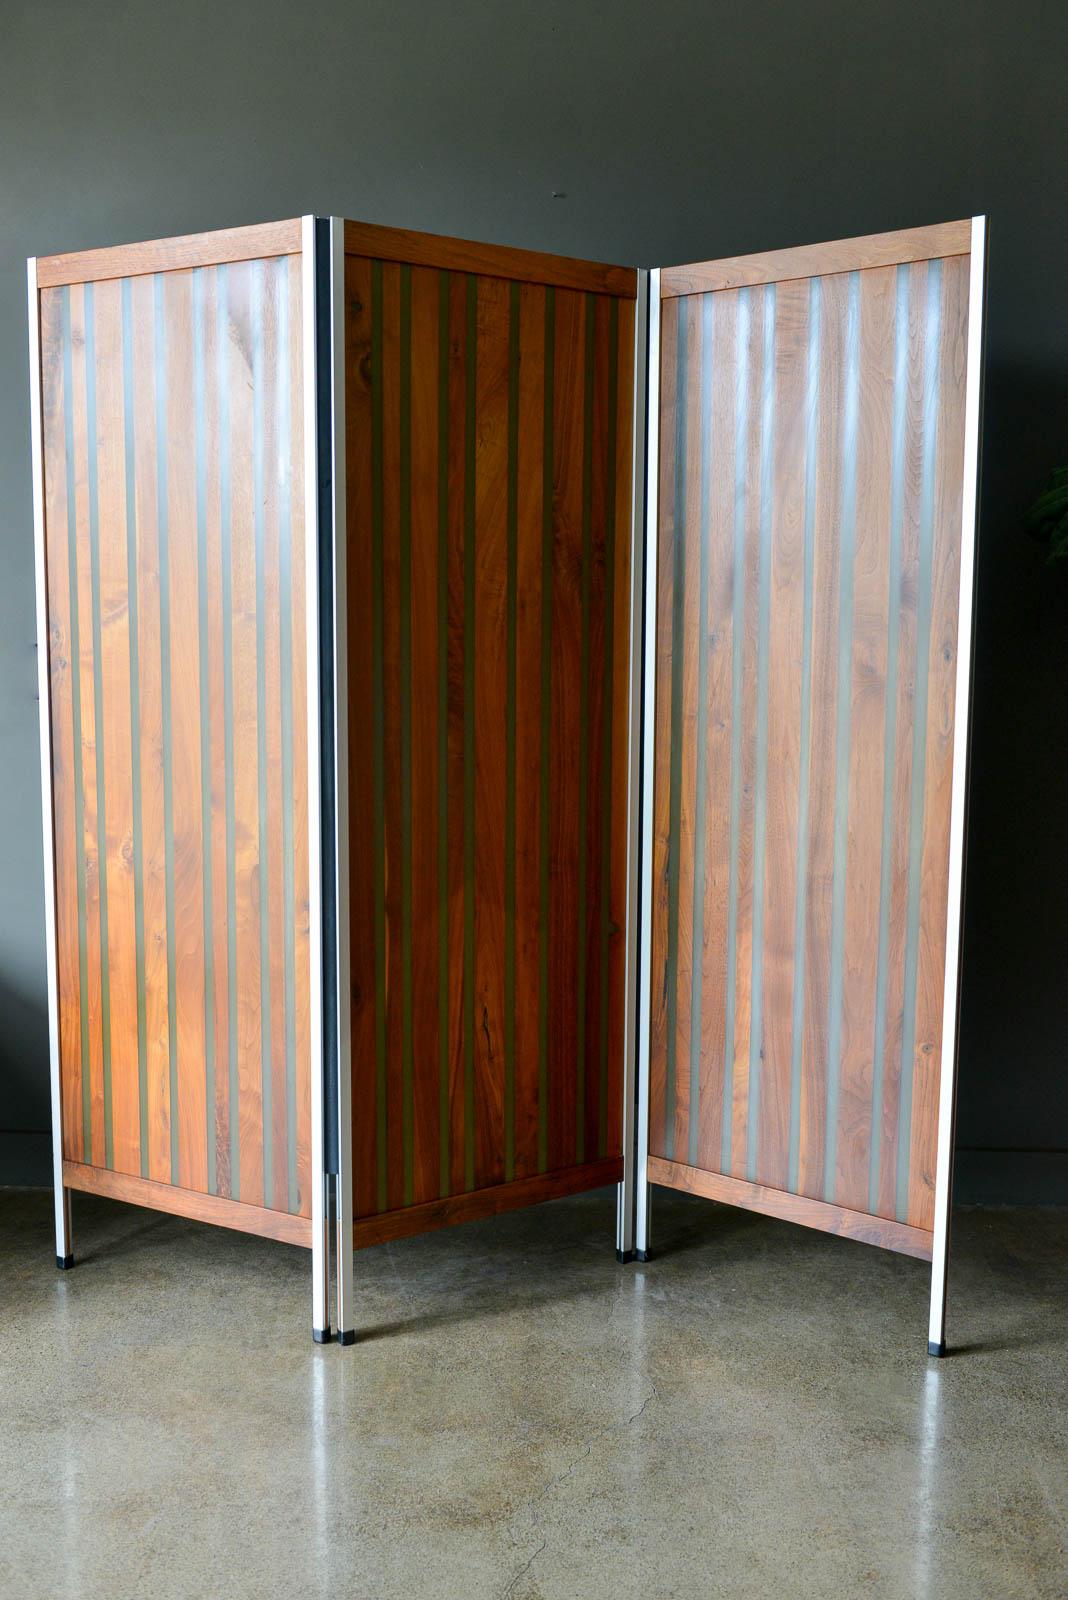 Beautiful walnut, resin and aluminum floating screen or room divider. Walnut is inlayed with beautiful translucent resin strips and aluminum frame. Excellent original condition. Measures 72